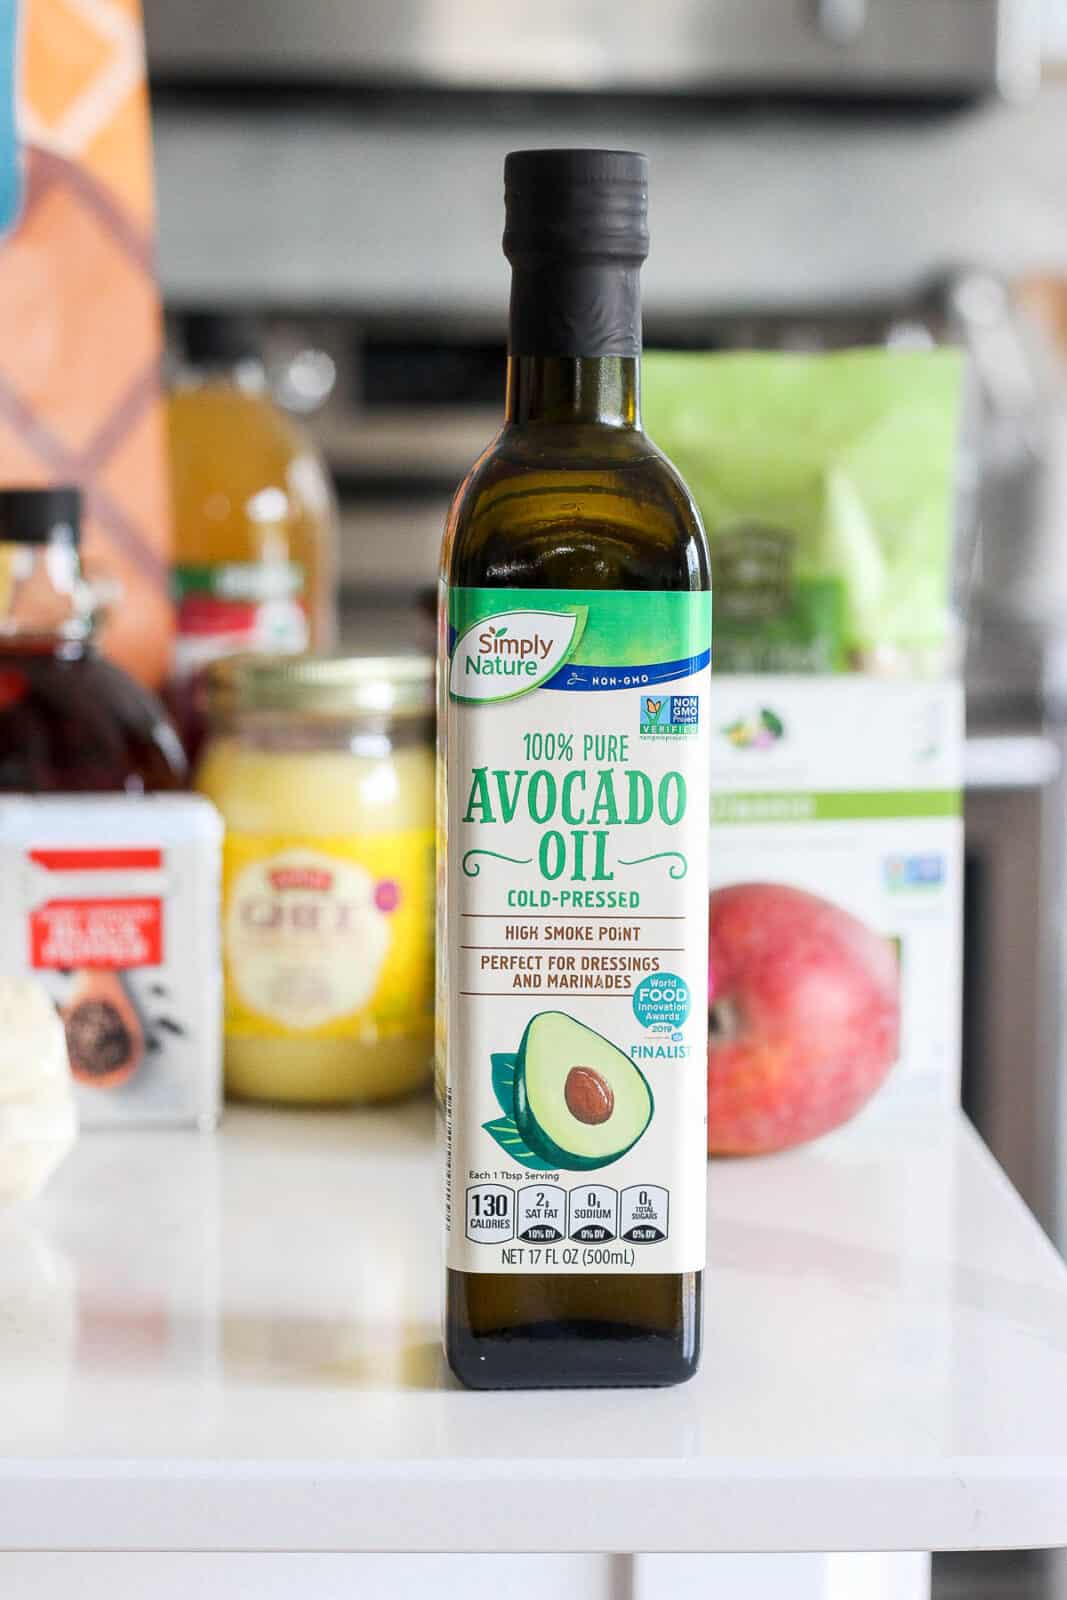 A bottle of Simply Nature Avocado Oil.